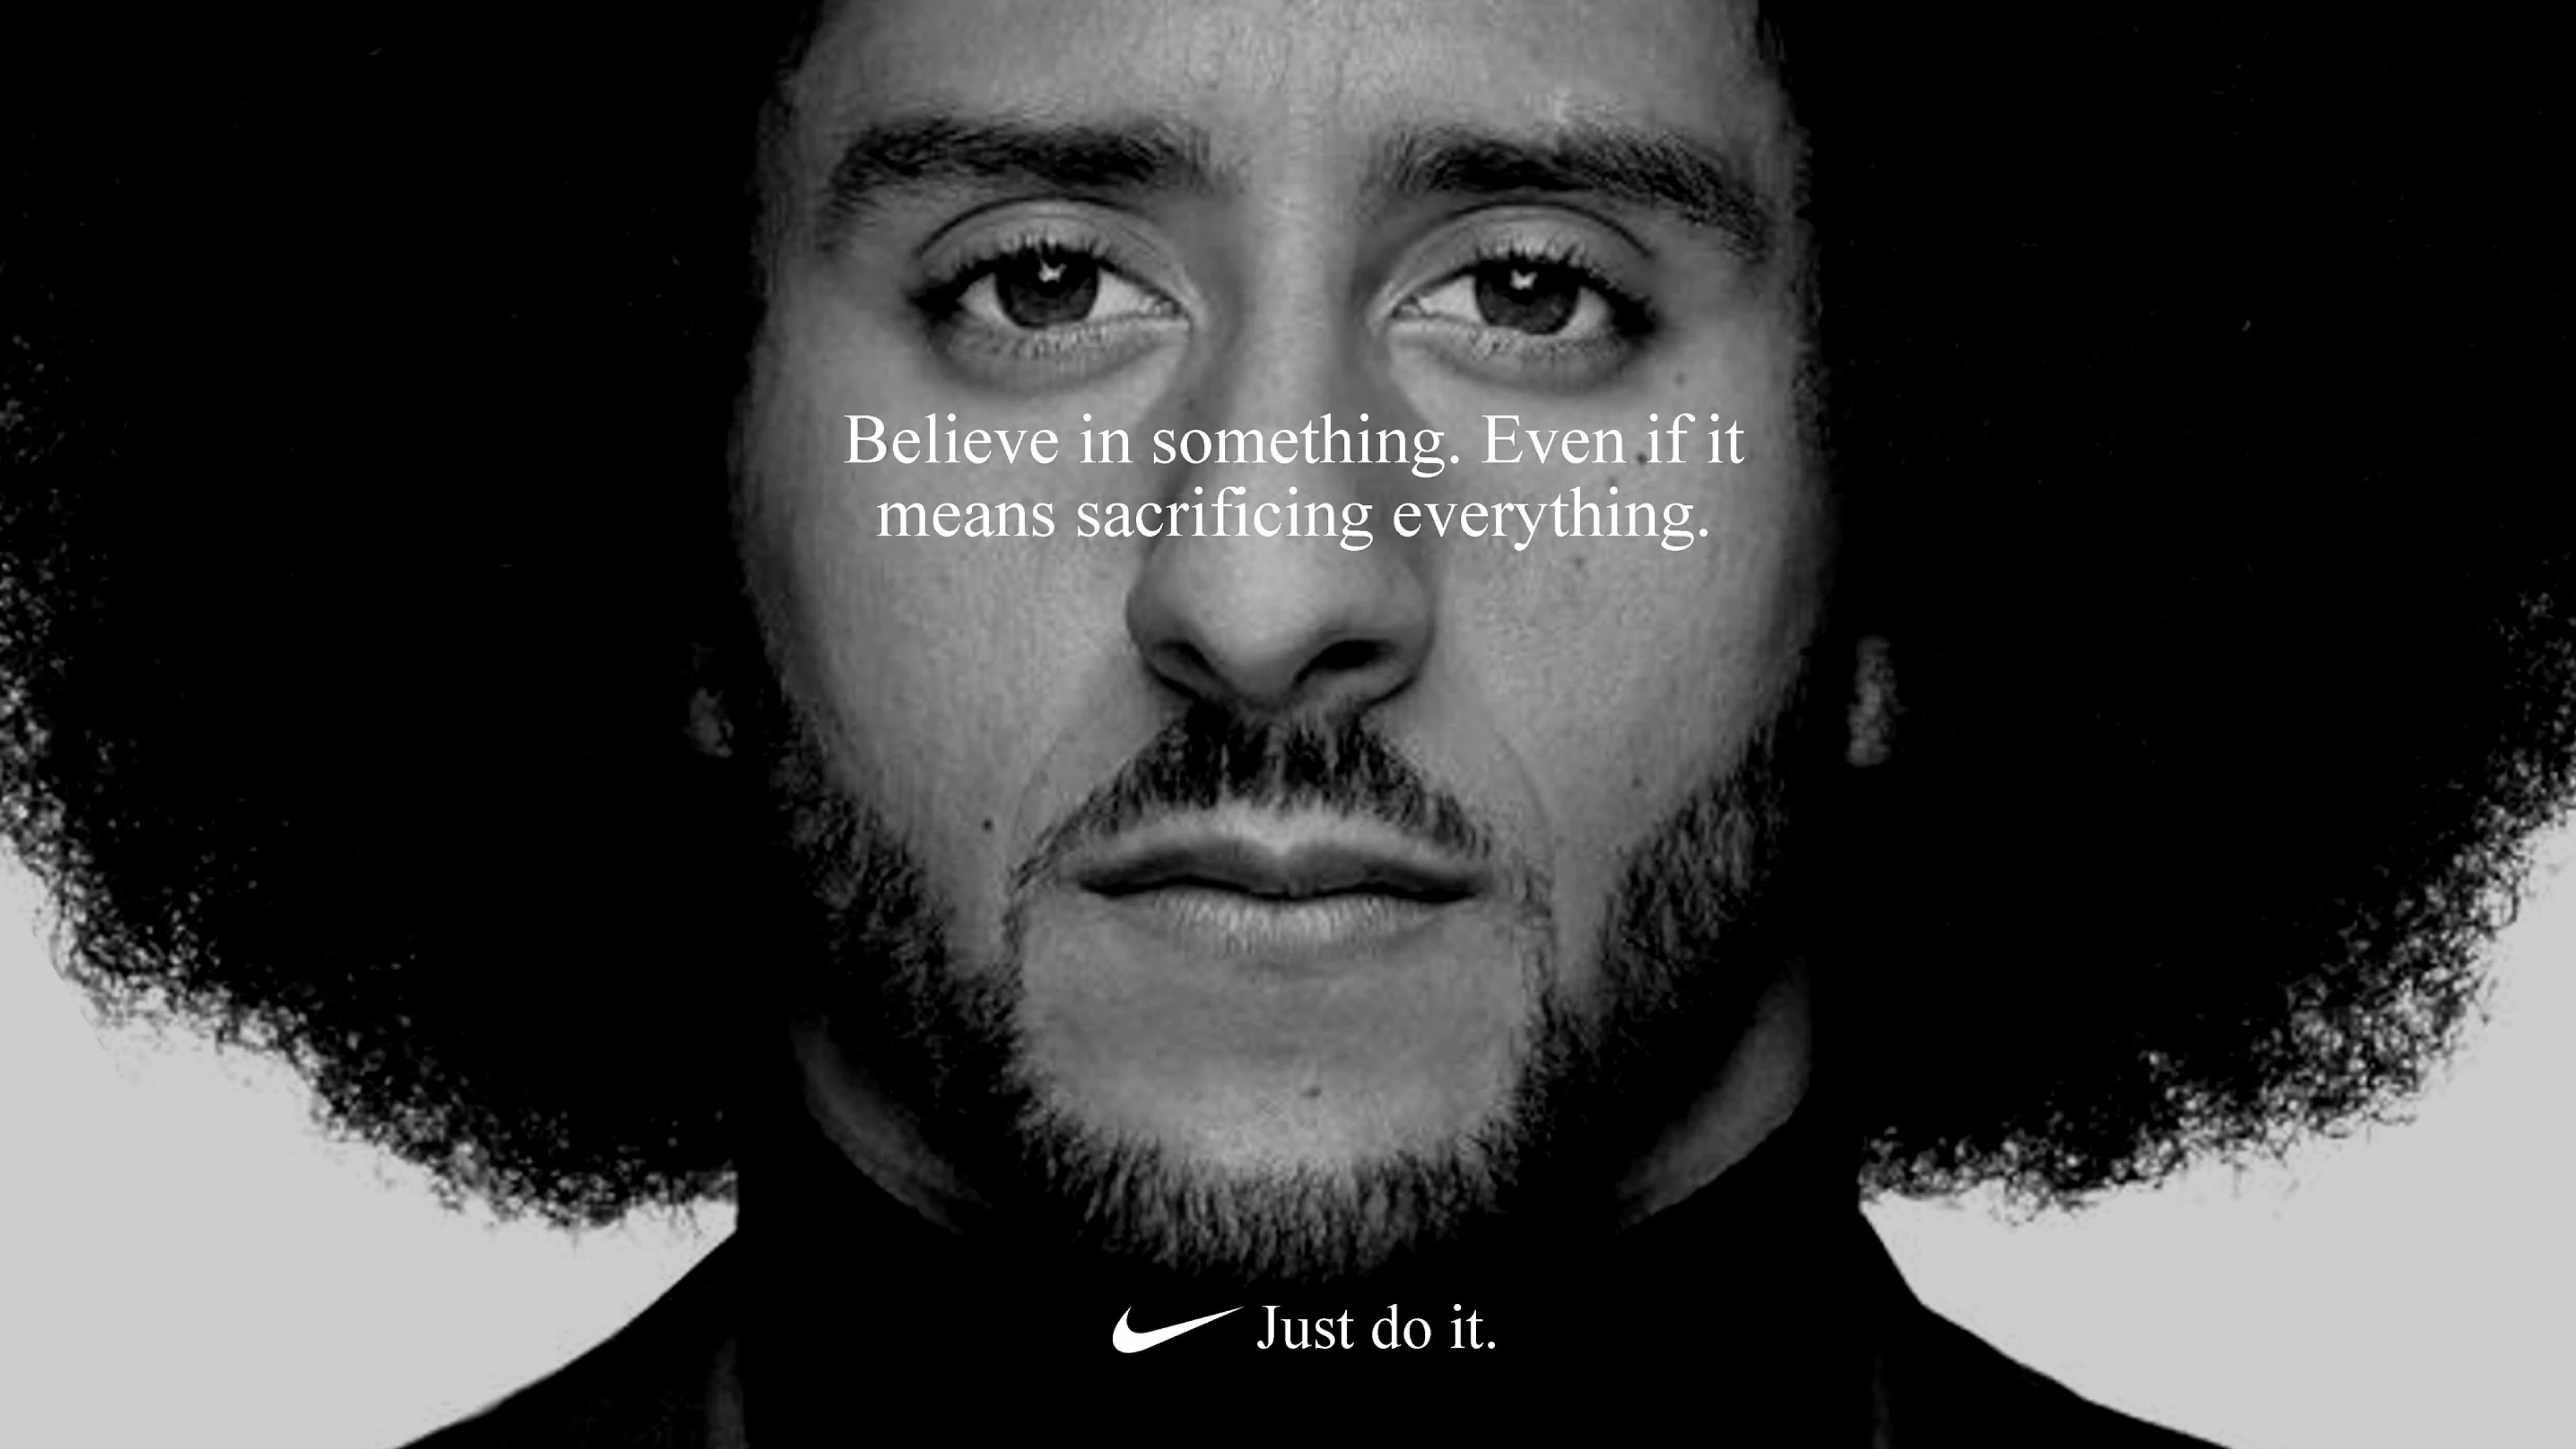 An ad featuring Colin Kaepernick from Nike-s Dream Crazy ad campaign